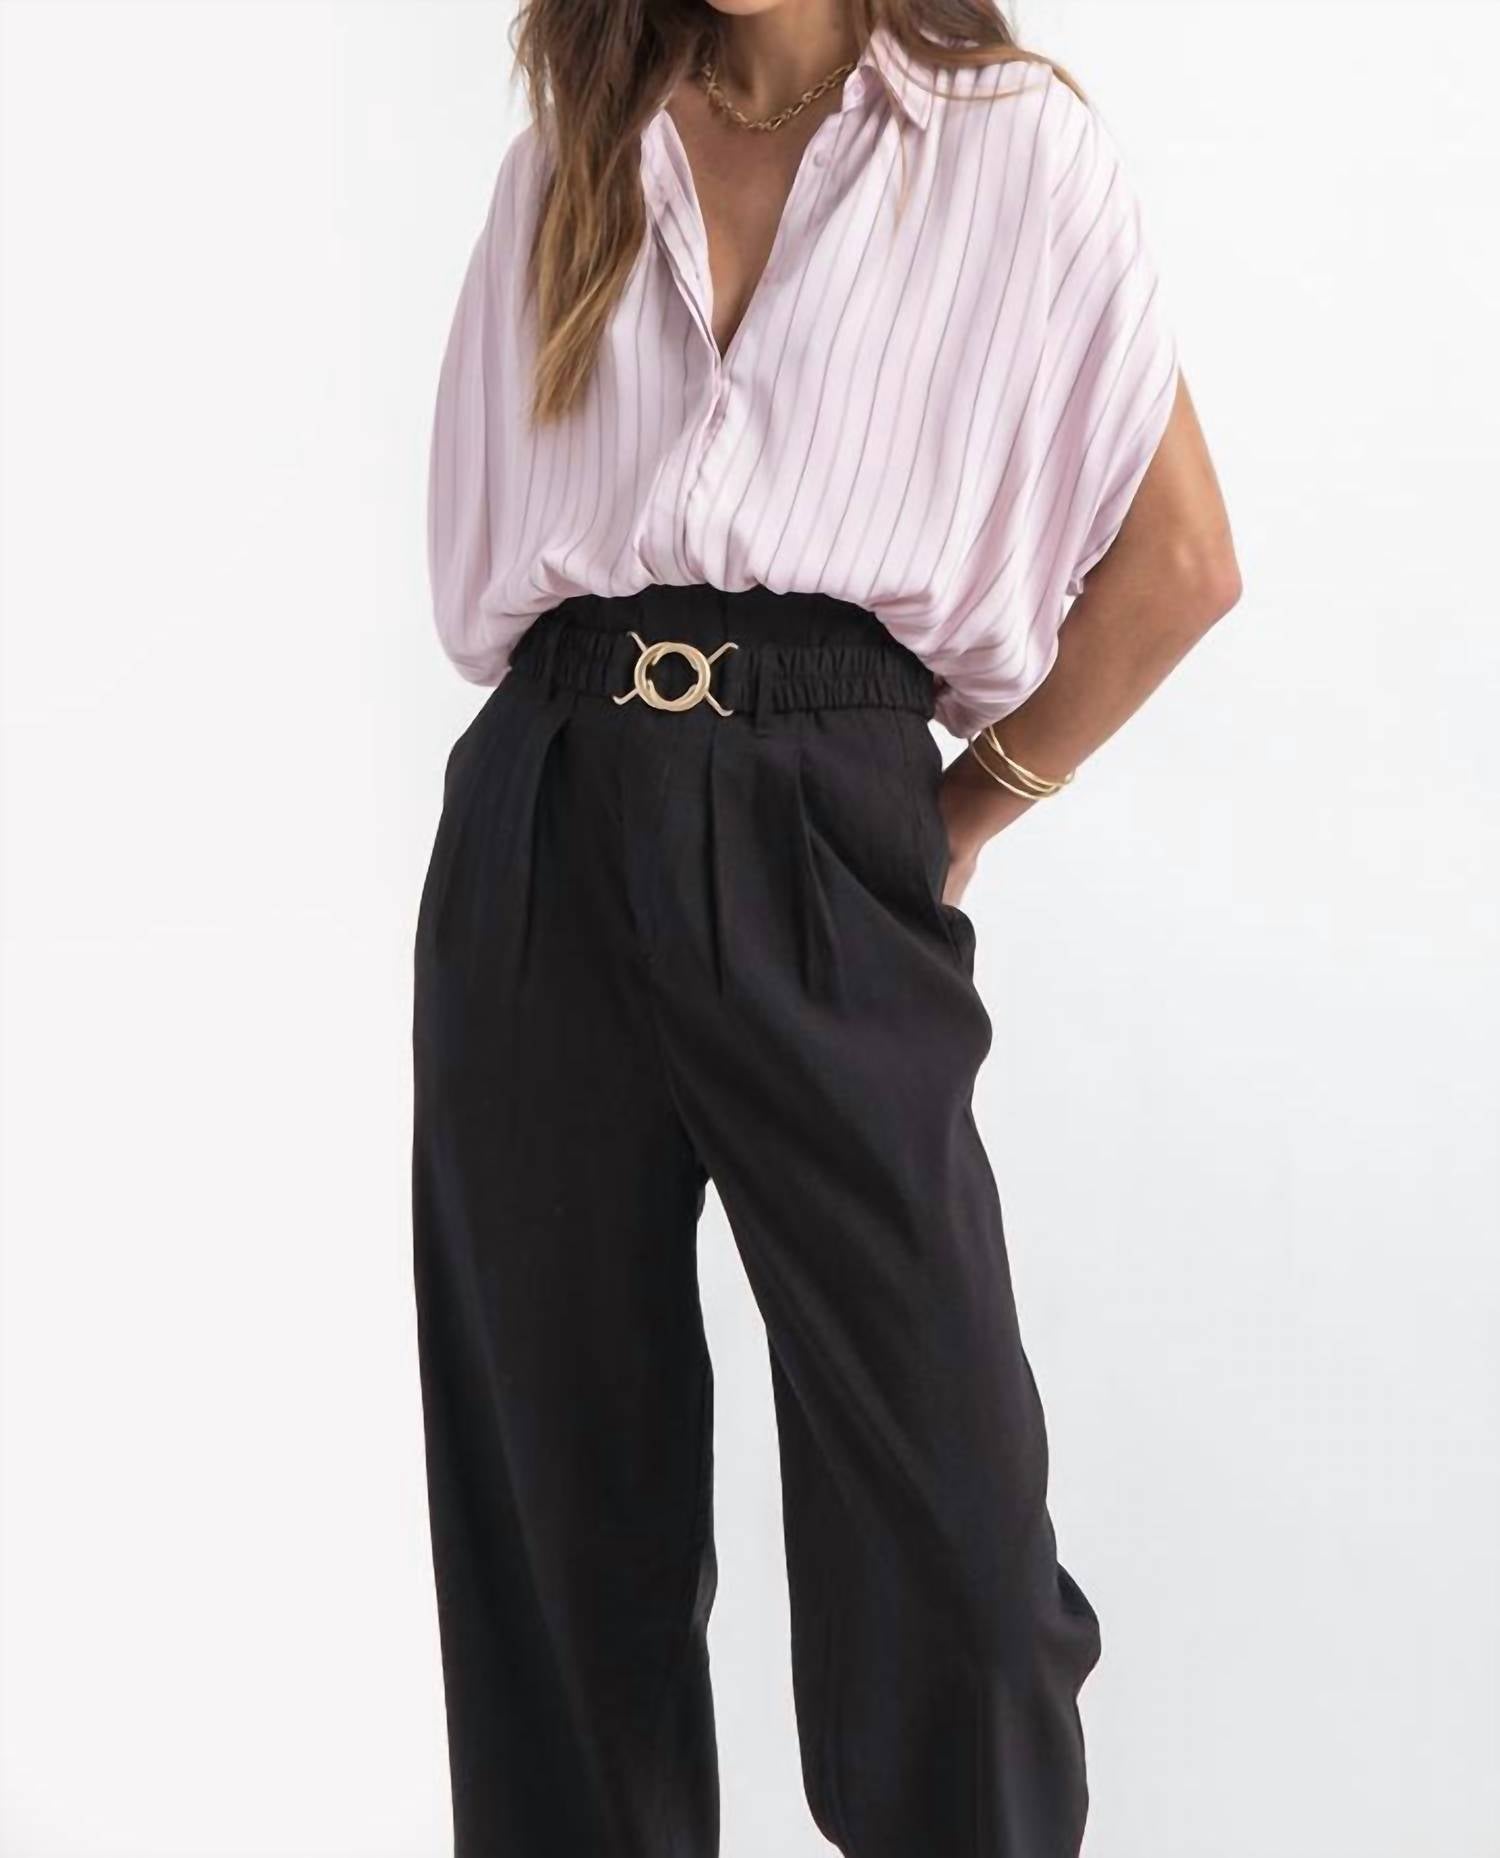 Bishop + Young - The Power Of Purple Blake Bubble Hem Top